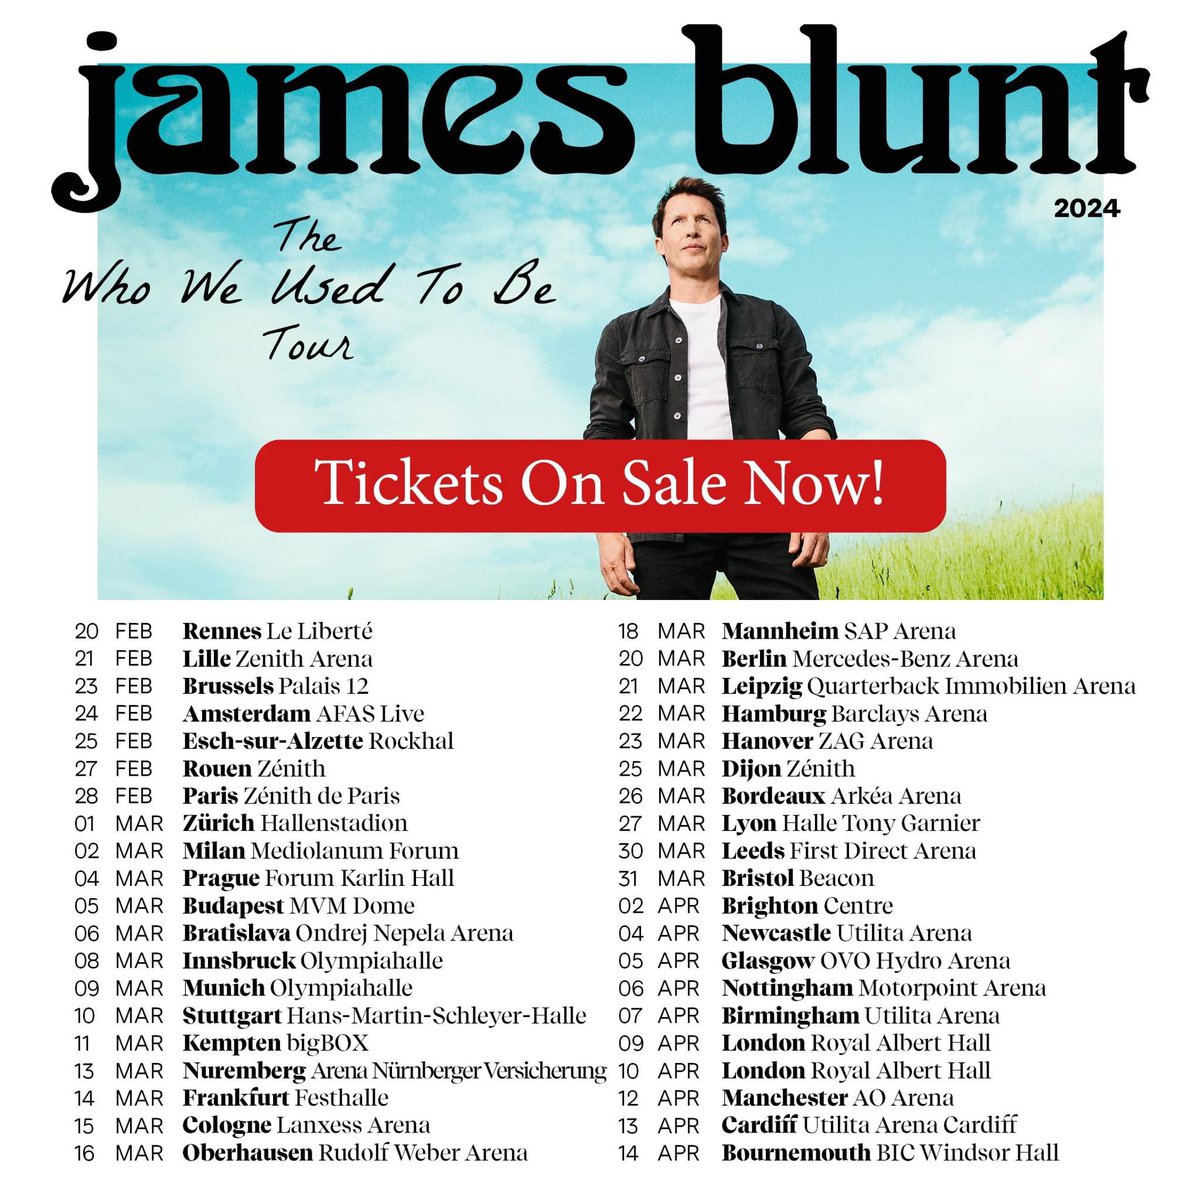 There’s no shame in coming alone. Plenty of others do. jamesblunt.com